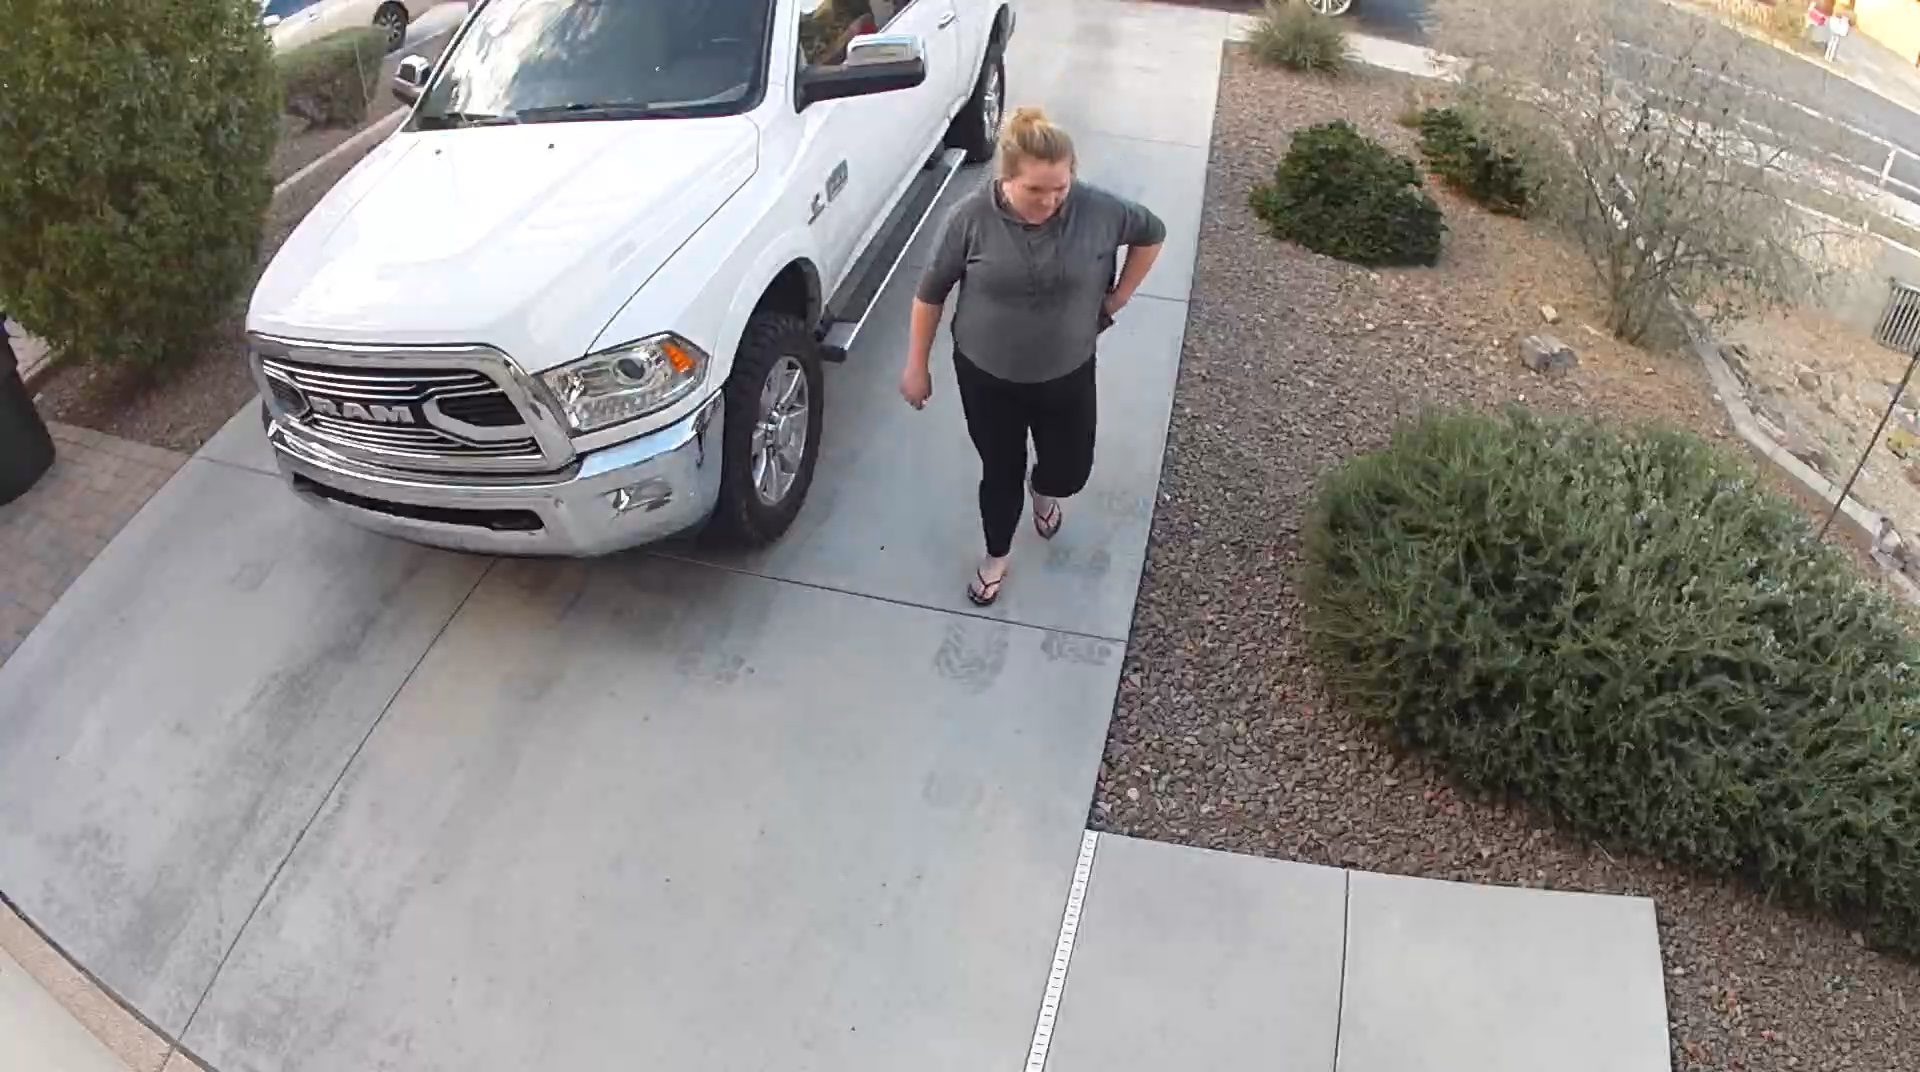 Porch Pirate Silvertooth Sally Helps Herself to Phoenix Resident’s Package